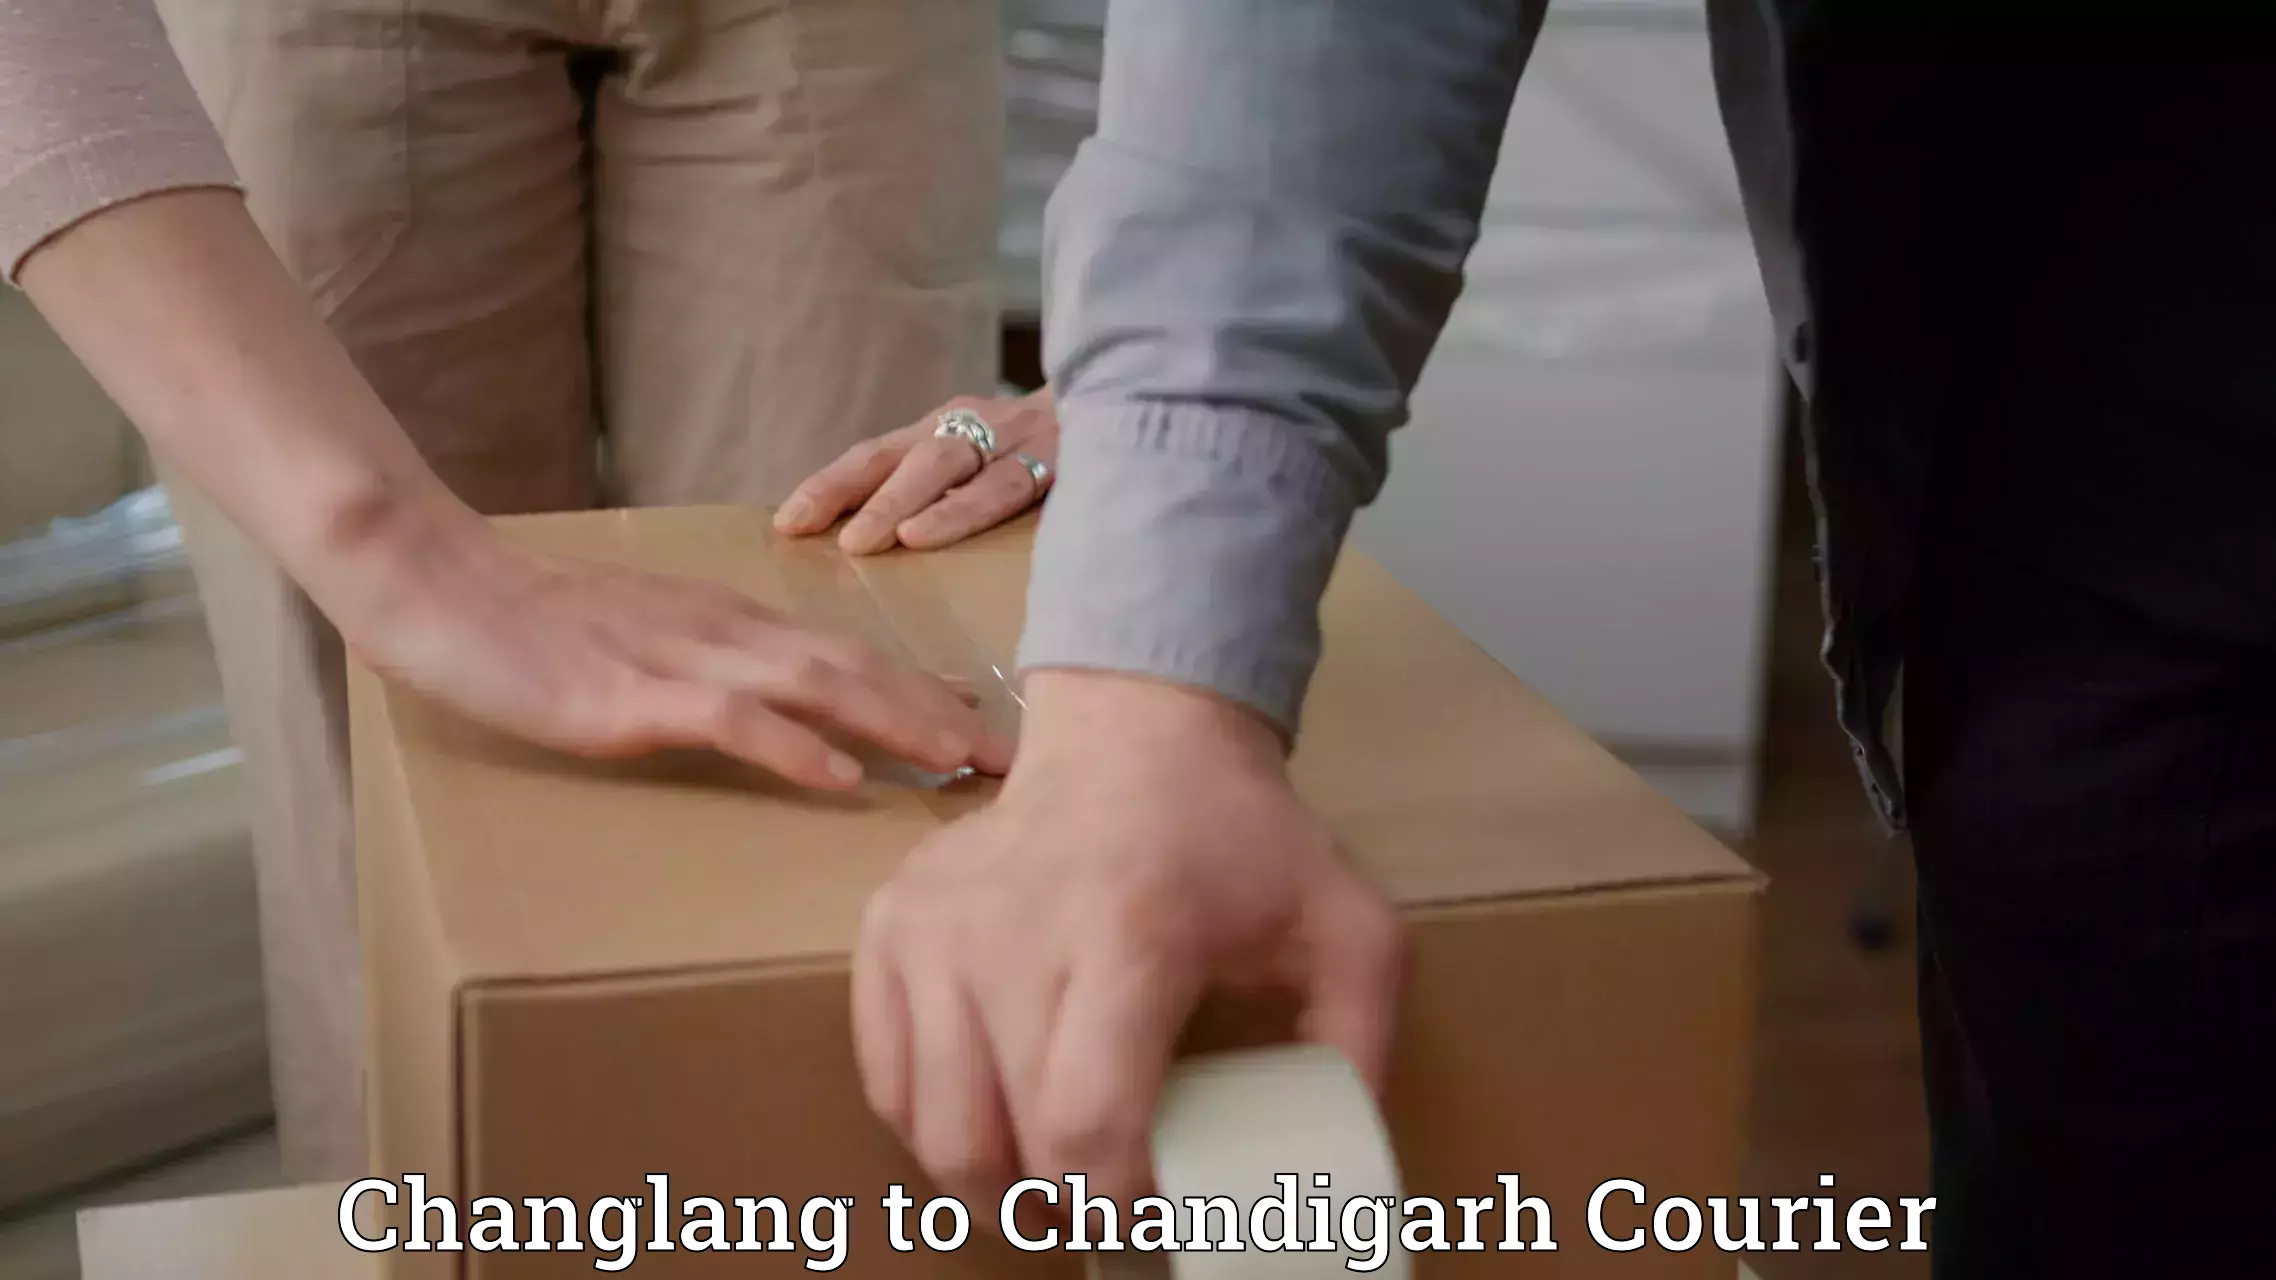 Baggage transport professionals Changlang to Chandigarh